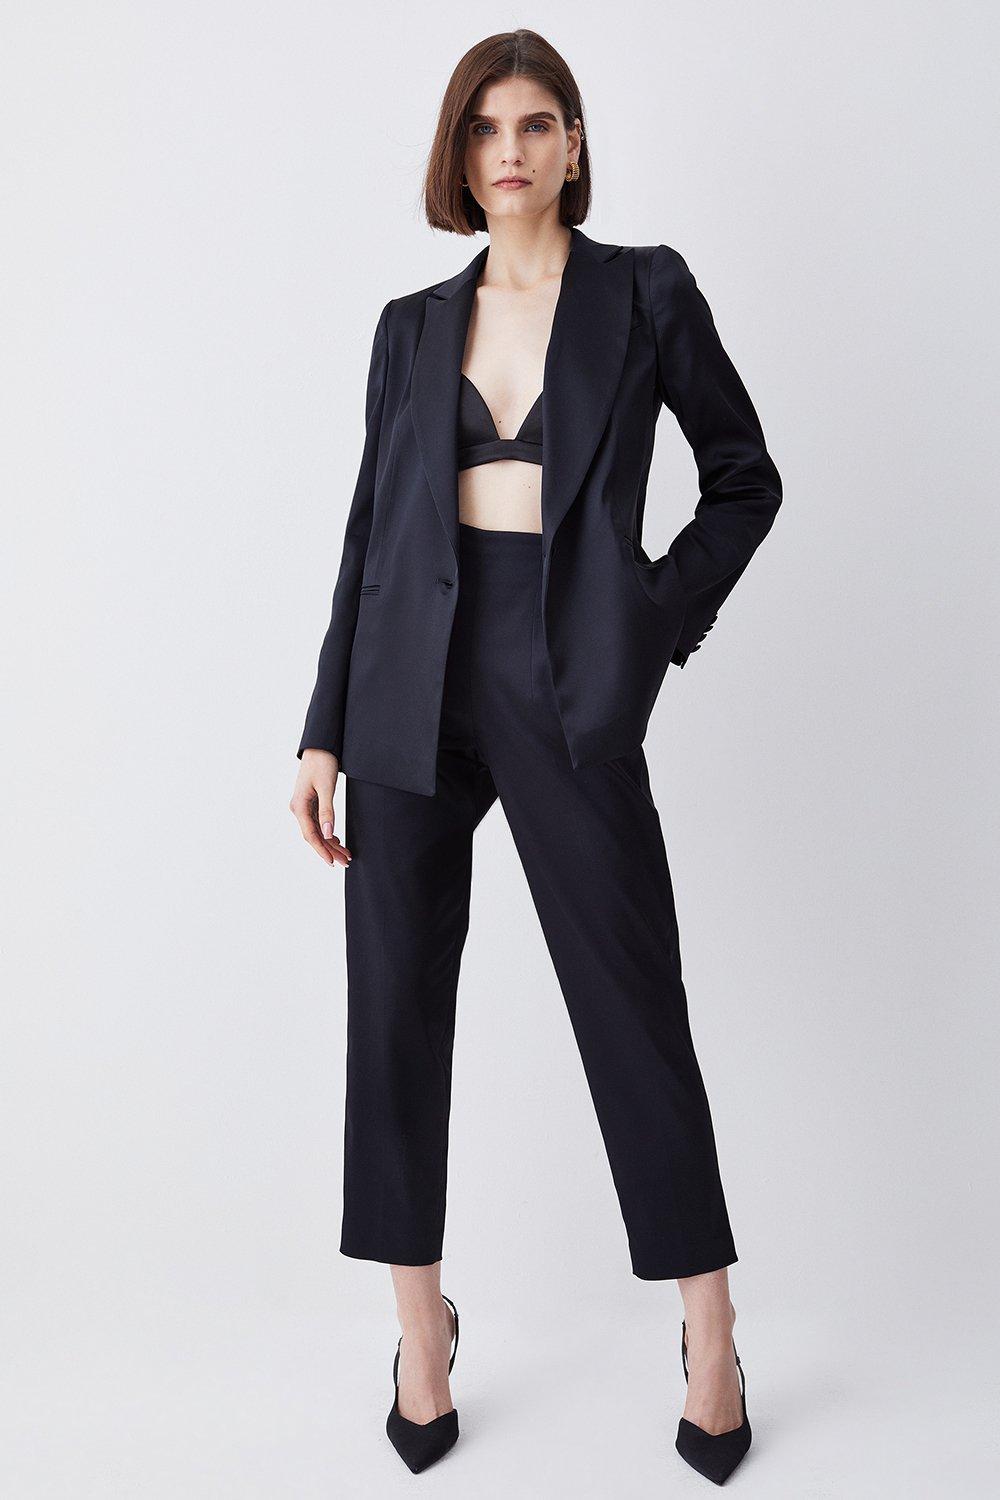 Black Italian Structured Satin Tailored High Waisted Trousers